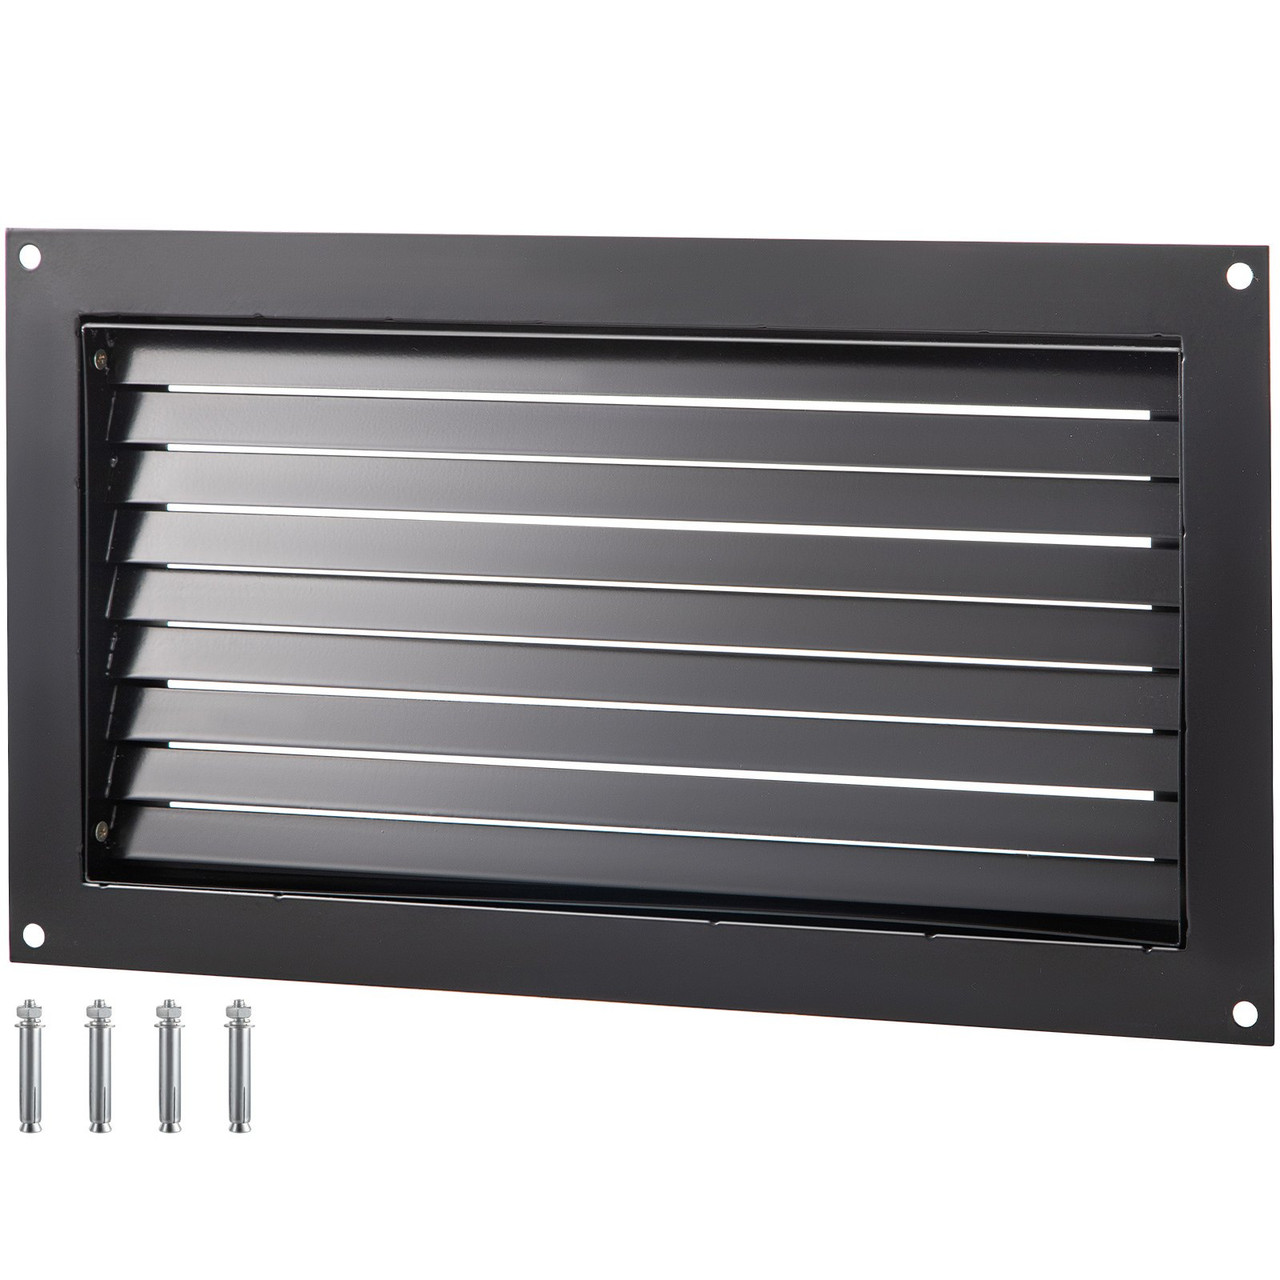 Foundation Flood Vent, 8" Height x 16" Width Flood Vent, to Reduce Foundation Damage and Flood Risk, Black, Wall Mounted Flood Vent, for Garages & Full Height Enclosures